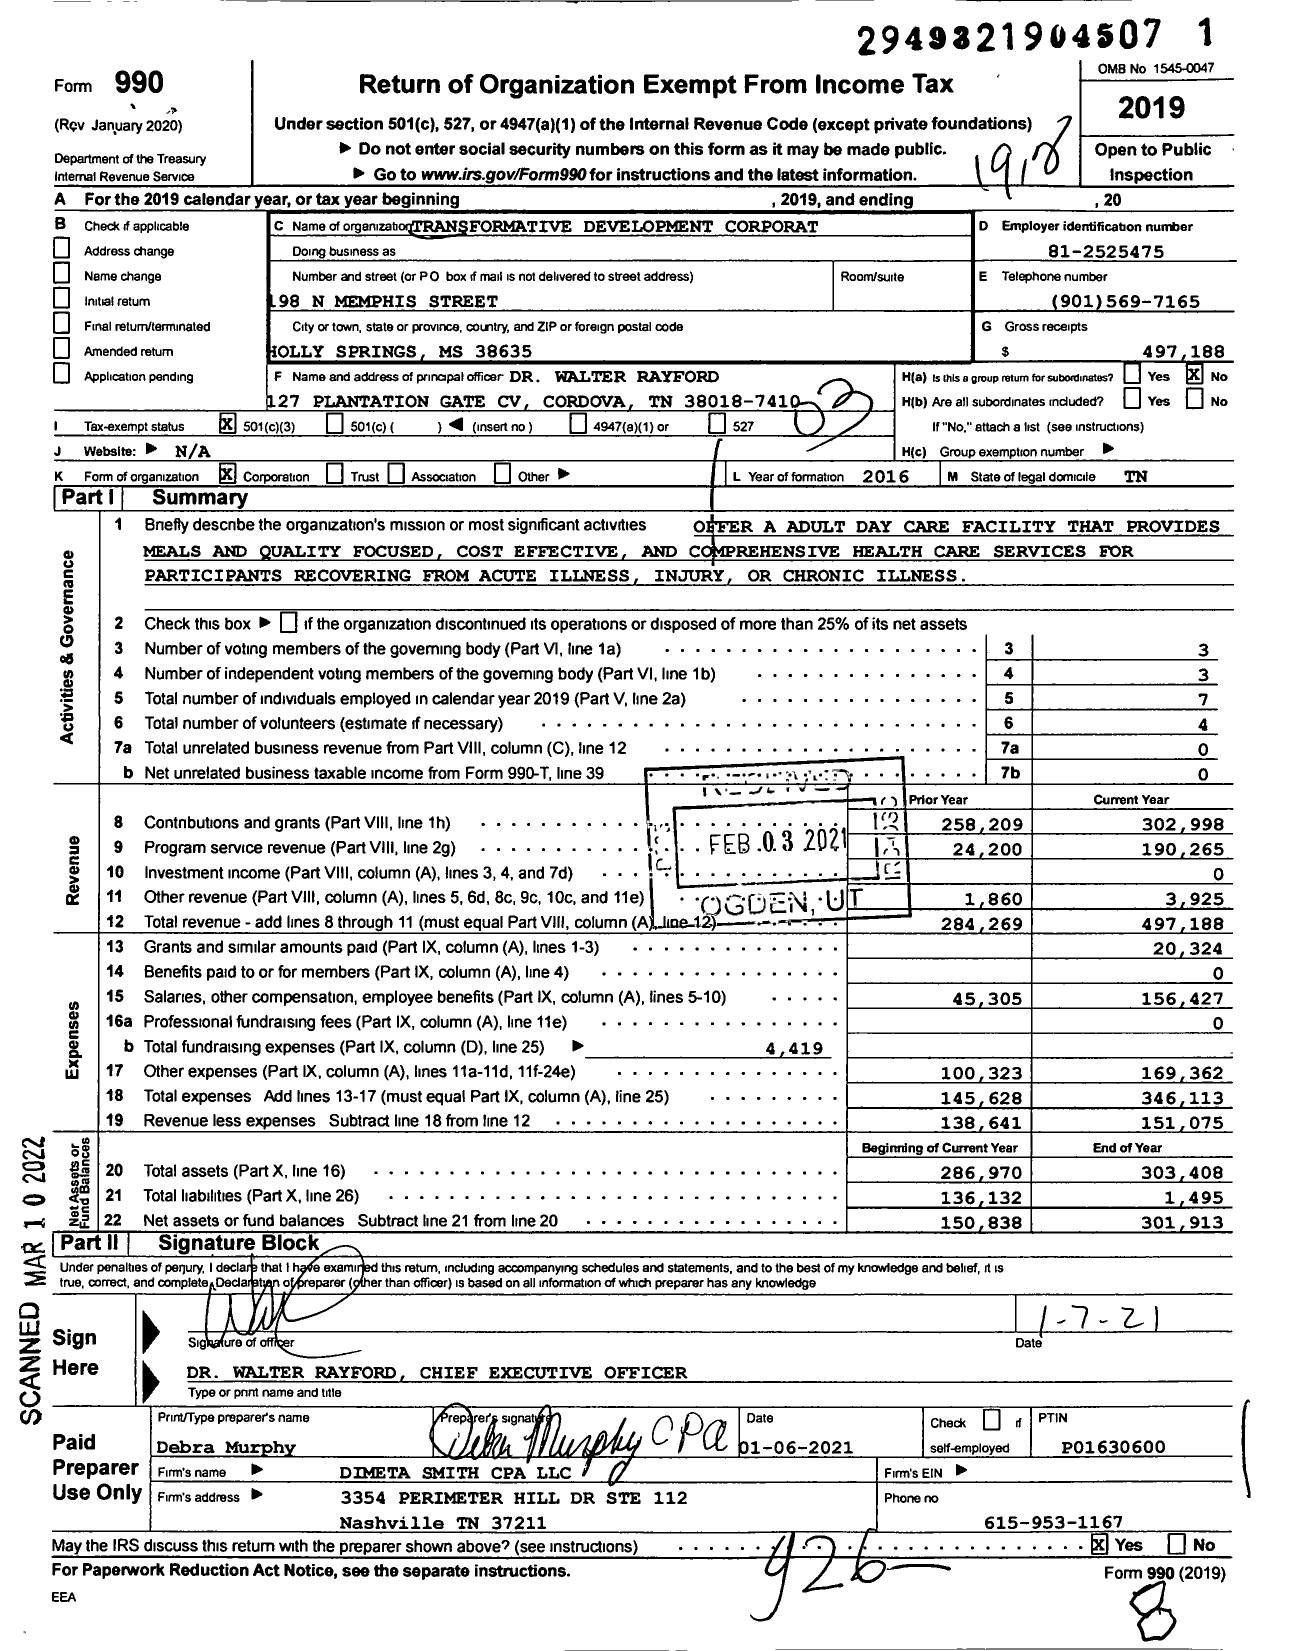 Image of first page of 2019 Form 990 for Transformative Development Corporation